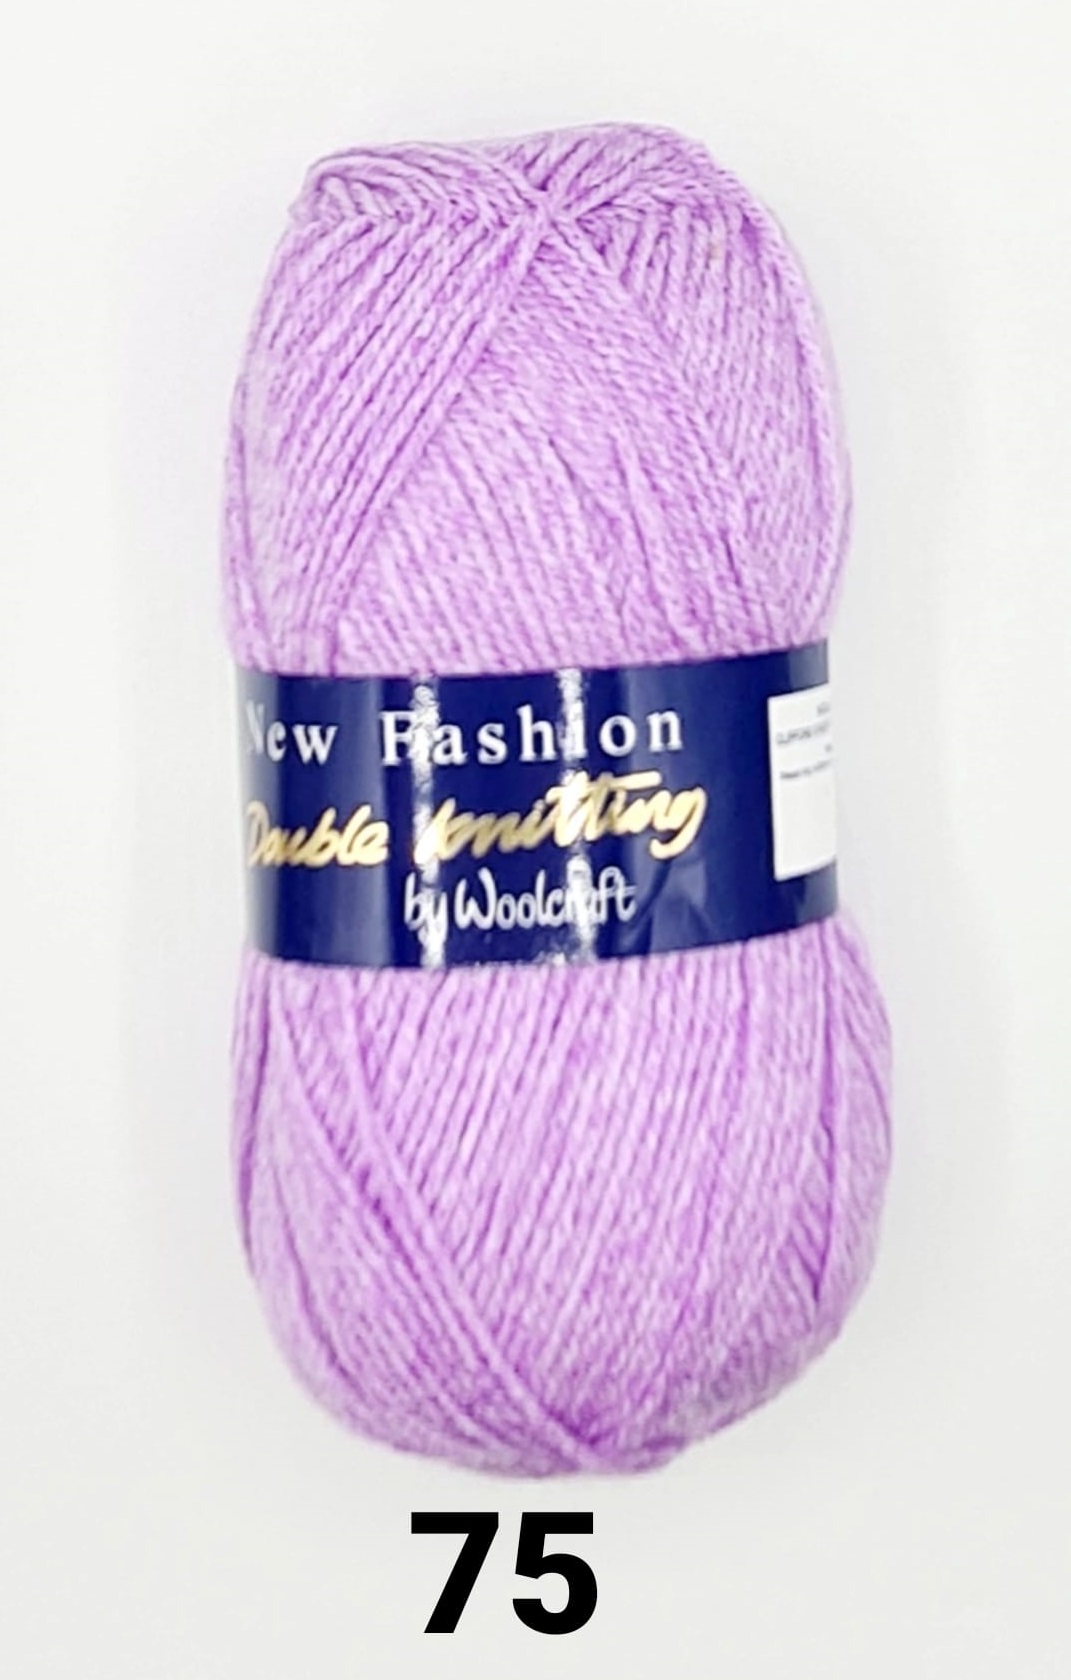 New Fashion DK Yarn 10 Pack Lilac Mist 075 - Click Image to Close